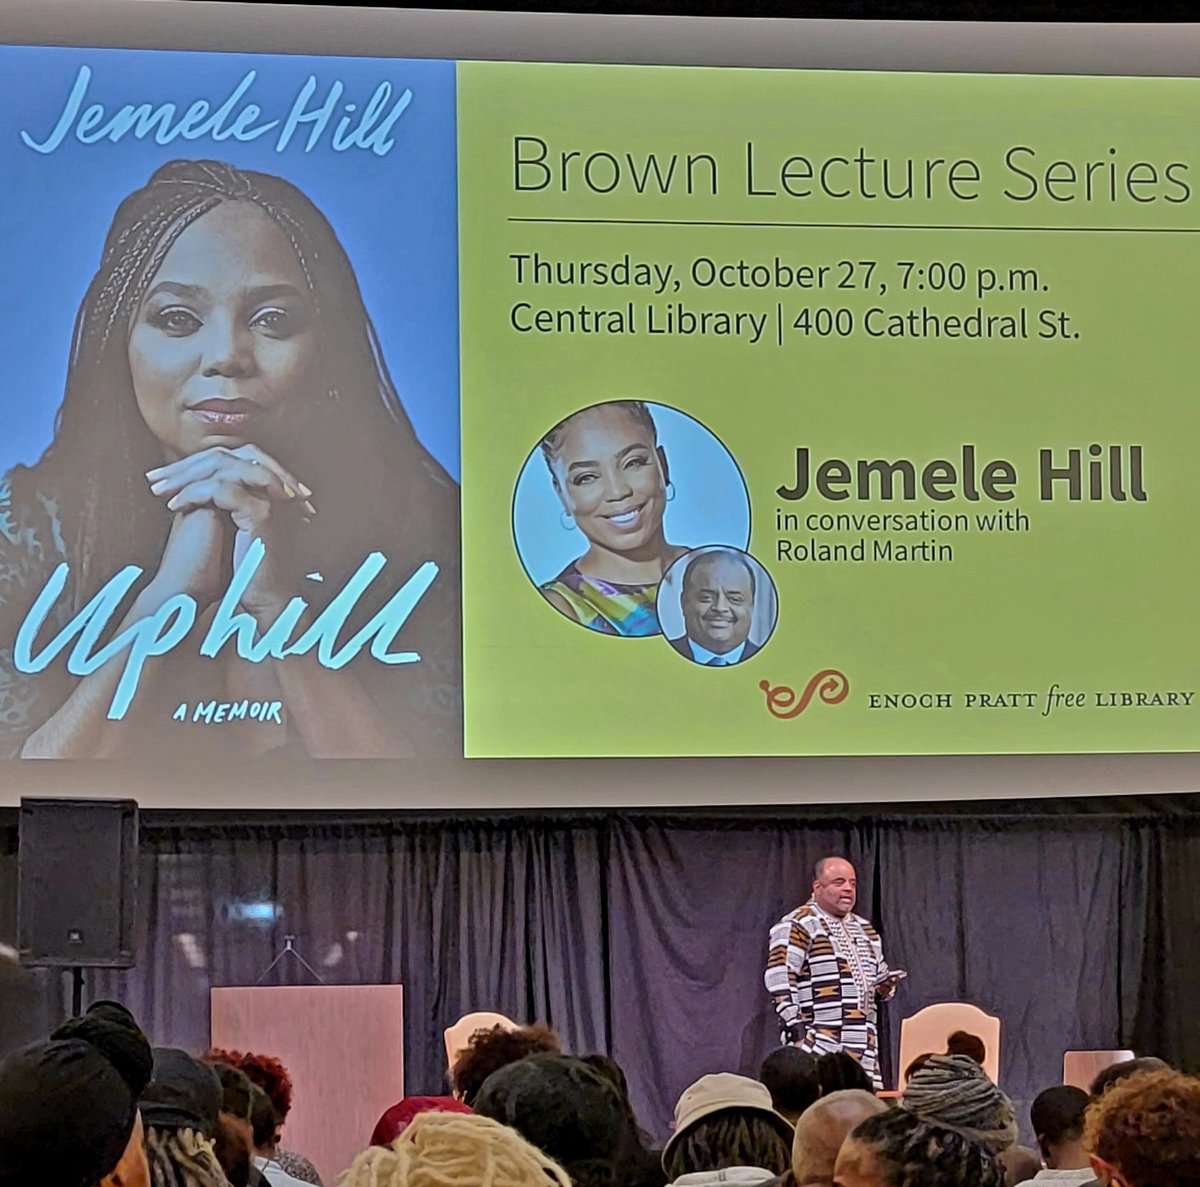 At the Brown Lecture Series with @rolandsmartin and @jemelehill at Enoch Pratt in Baltimore. Thanks for the book! @DocShay_UrbanEd @TheCamilleSnow @Mobetta1908